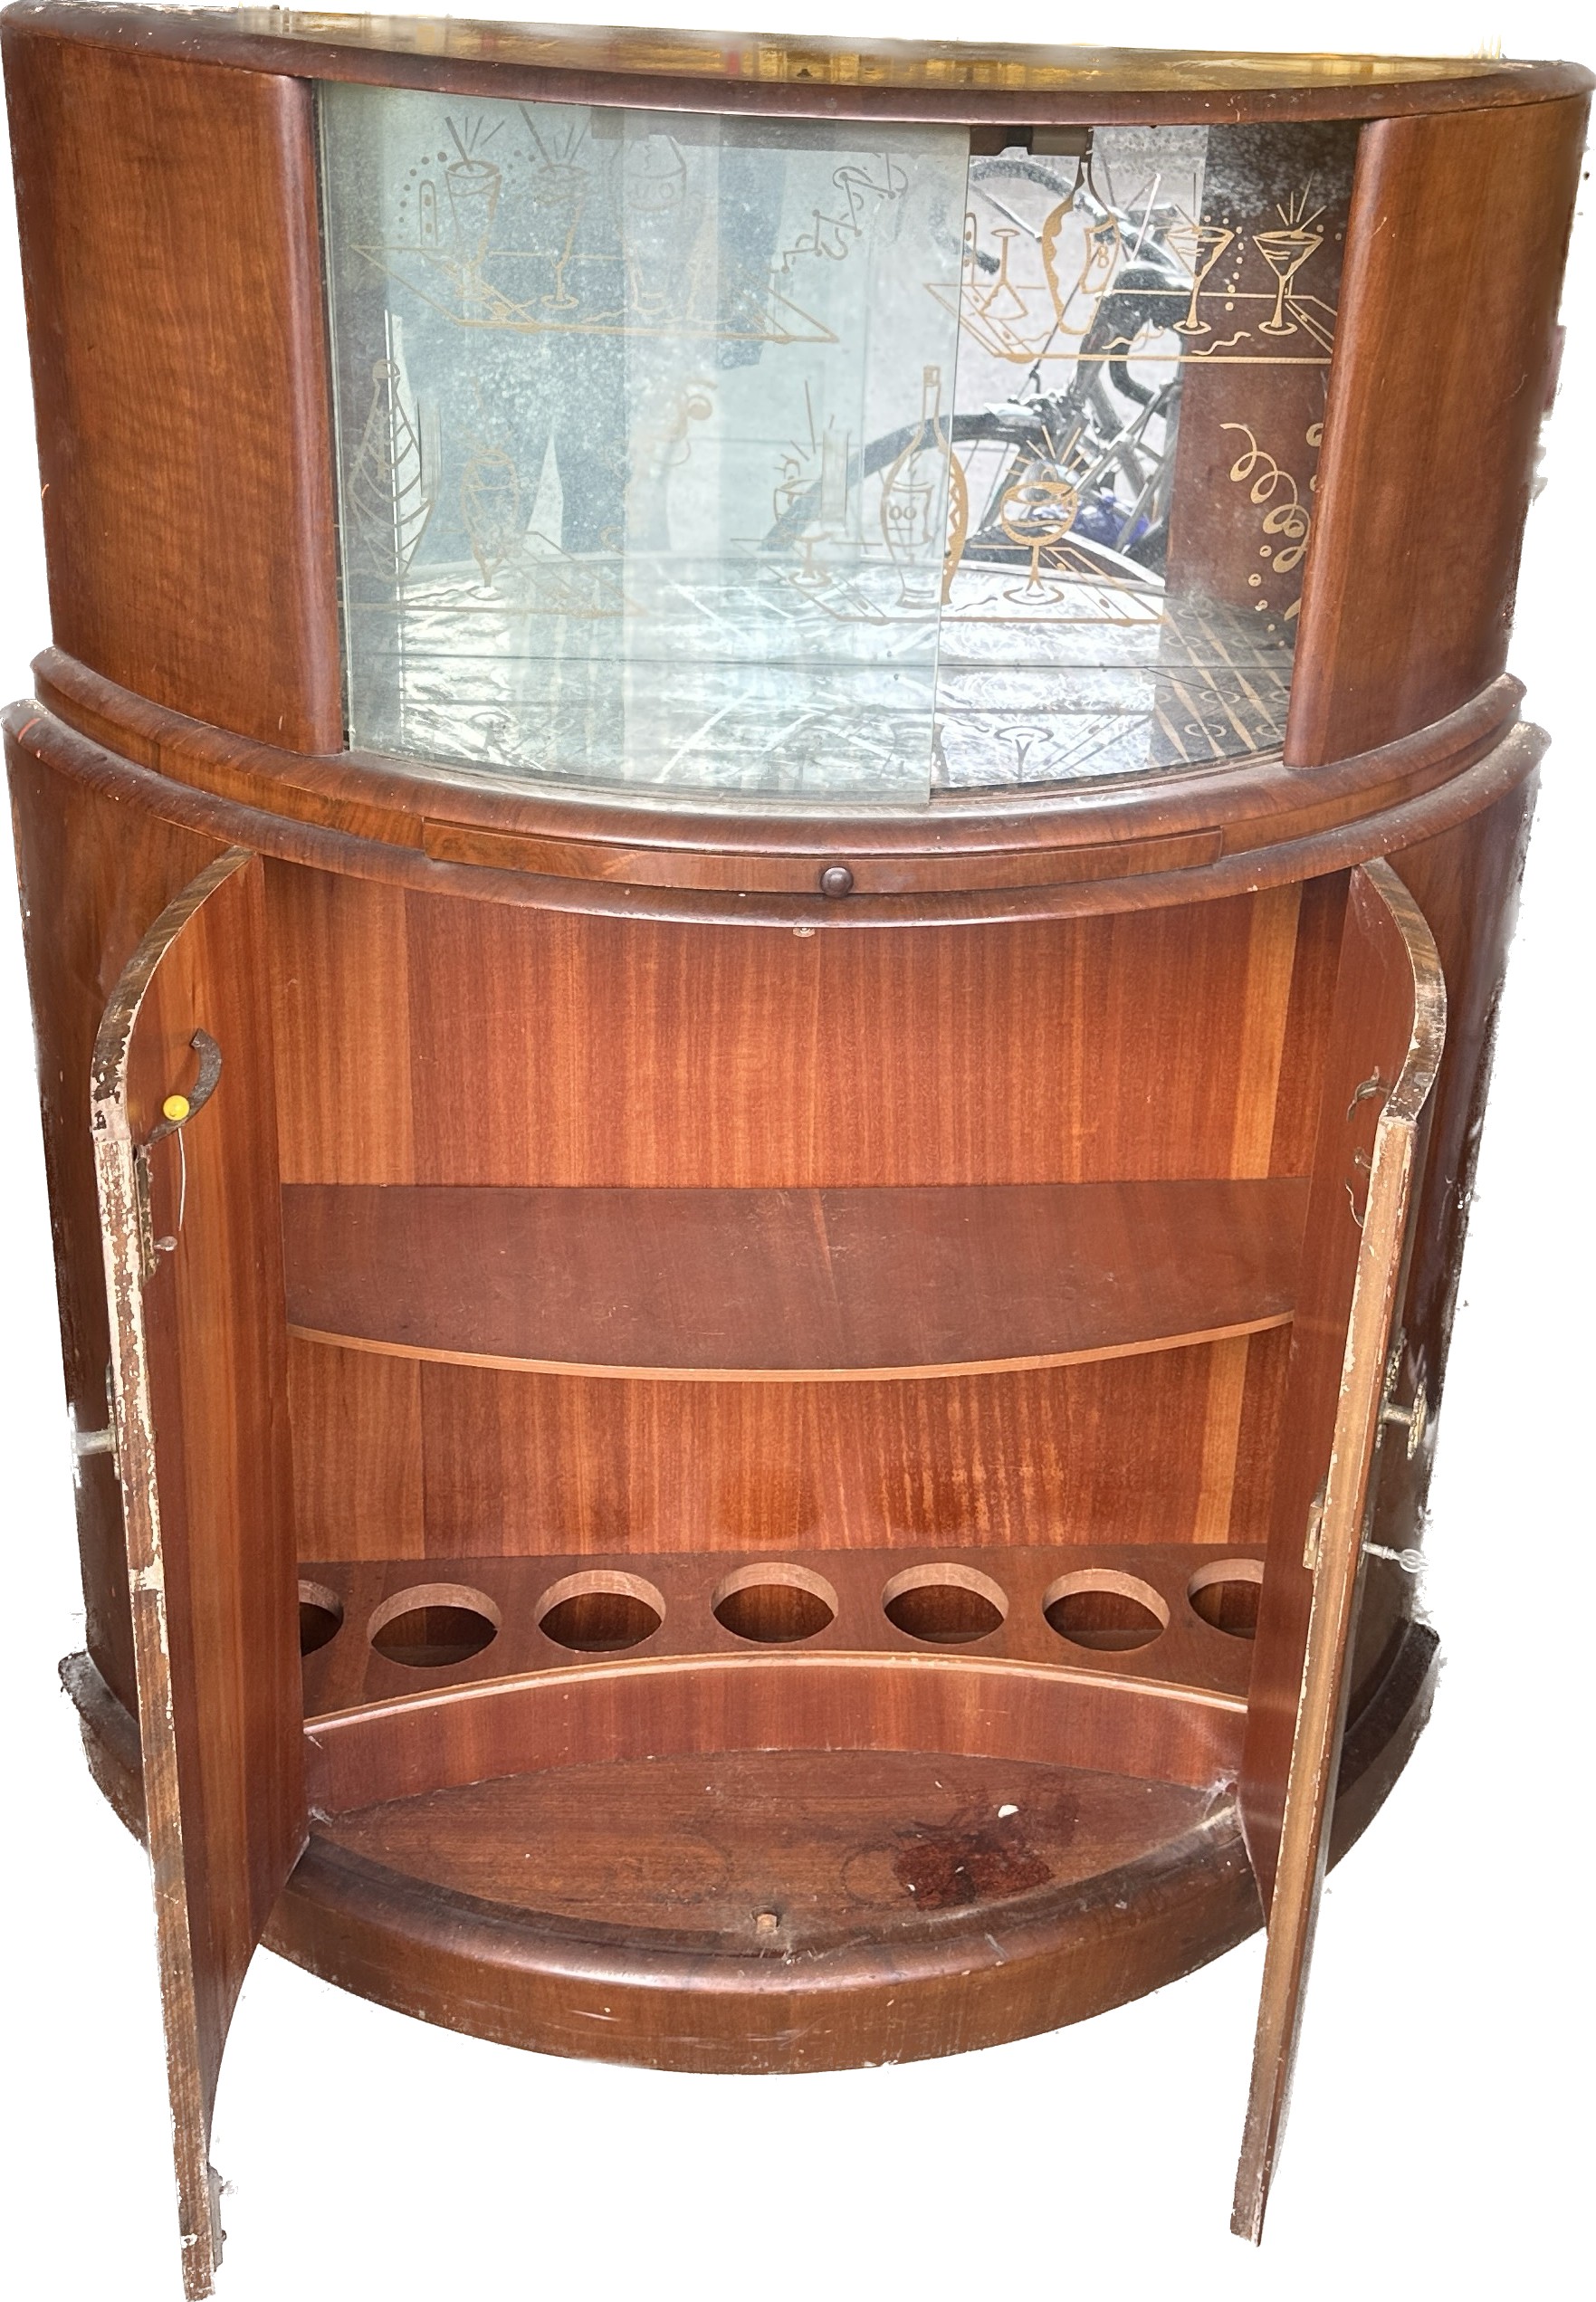 Art deco drinks cabinet measures approx 50 inches tall, 40 inches wide, 15 deep- crack to glass - Image 2 of 3